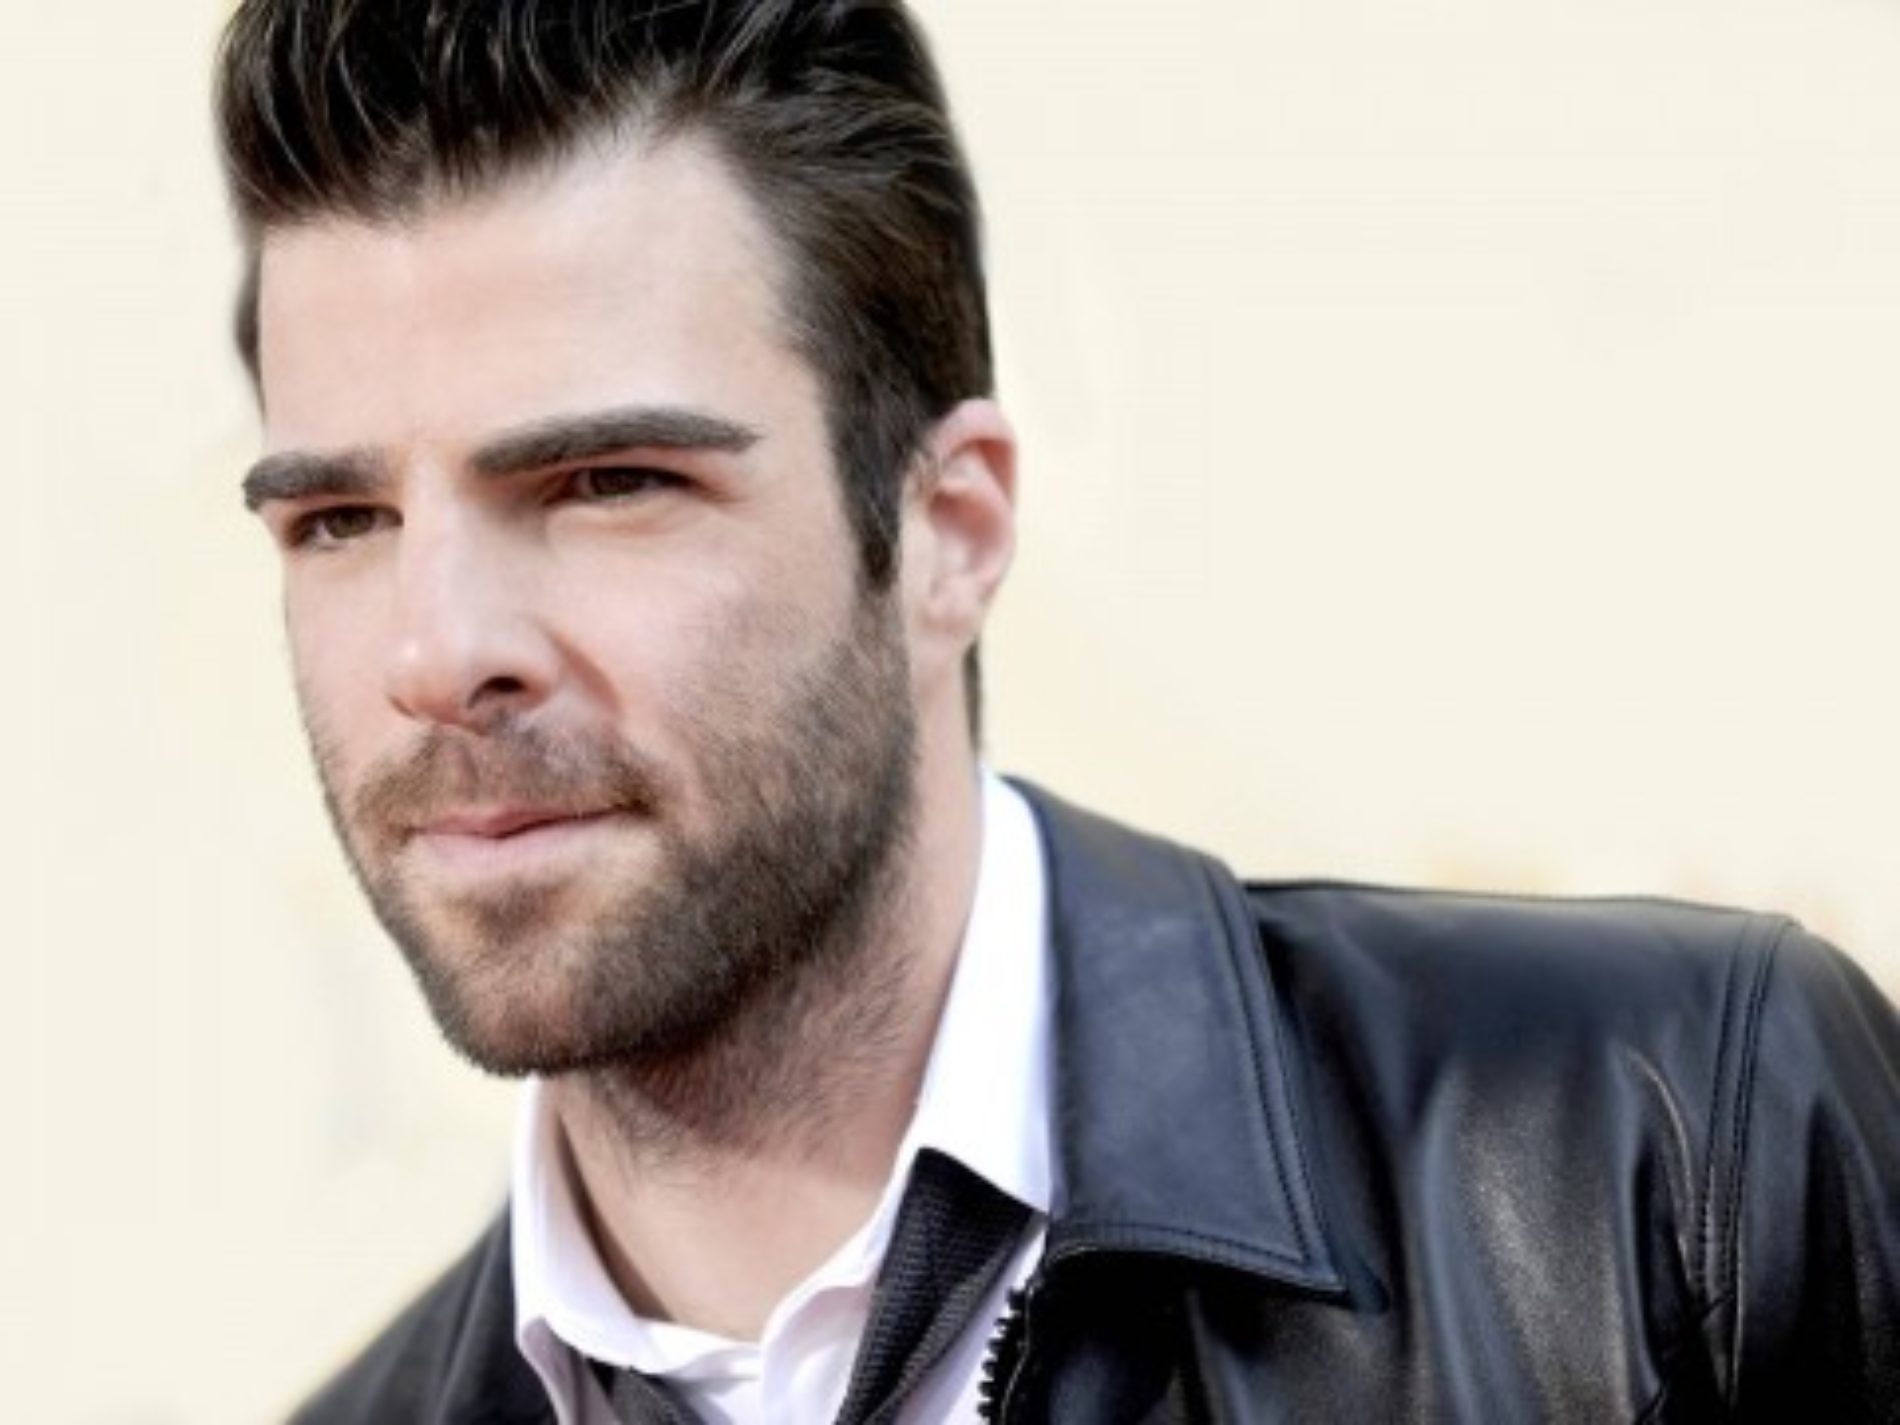 Zachary Quinto Stopped Going To Church When He Realized He Was Gay